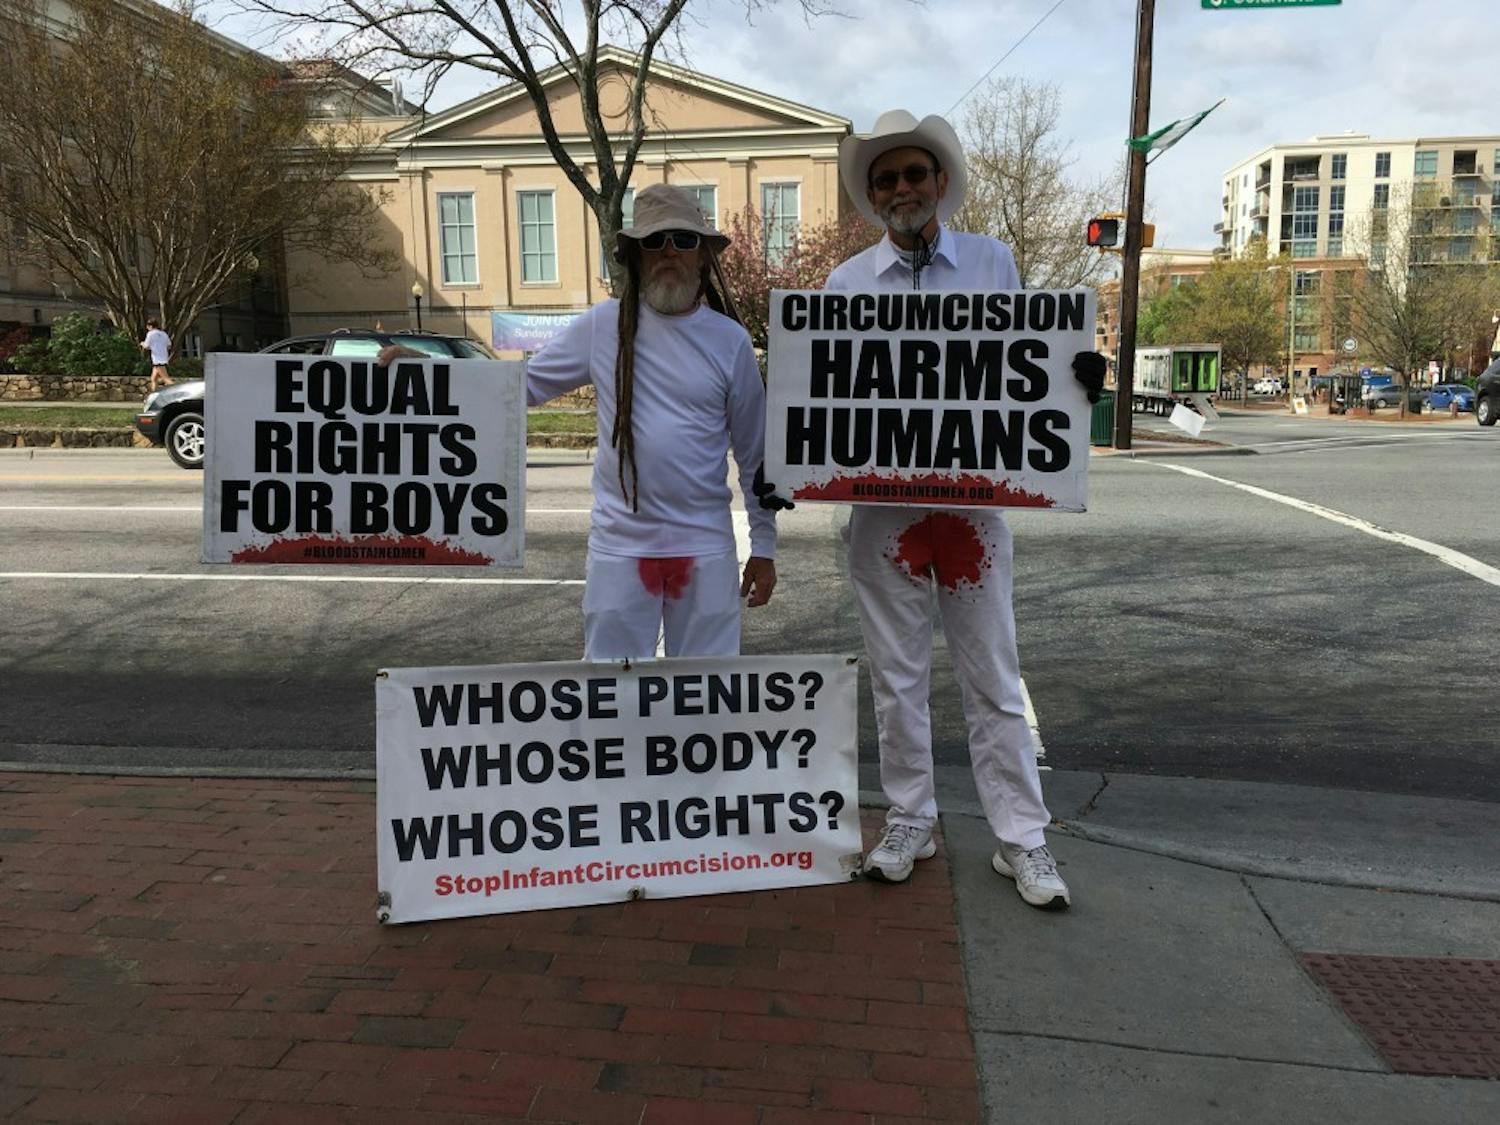 Protestors took to Franklin Street on Wednesday to discuss circumcision.